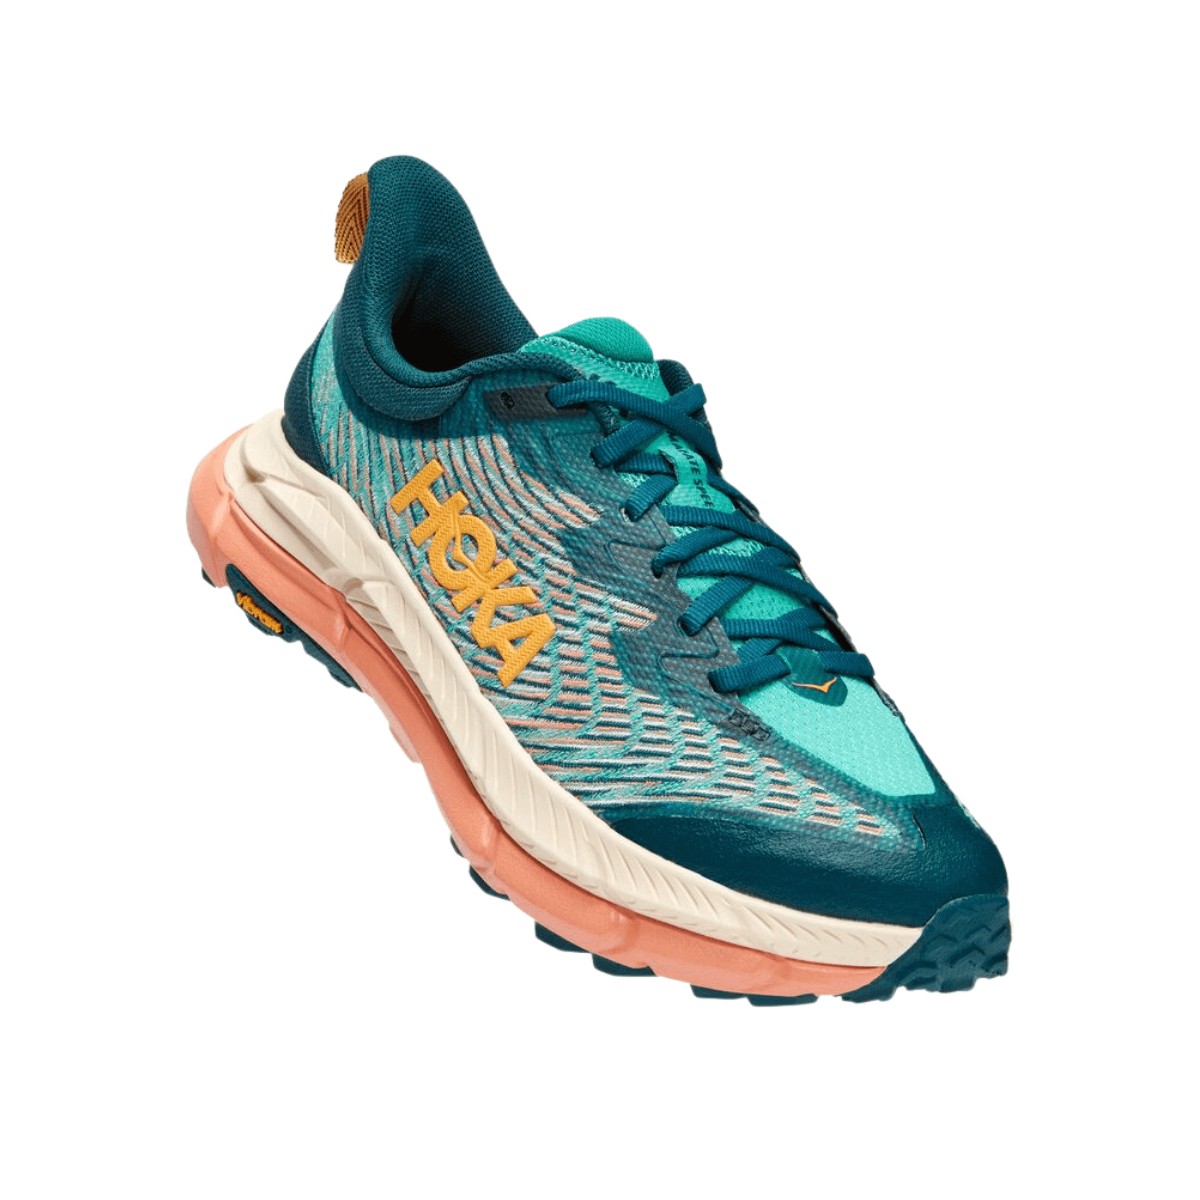 Chaussures Hoka One One Mafate Speed 4 Turquoise Rose AW22 Femme, Taille EU 38